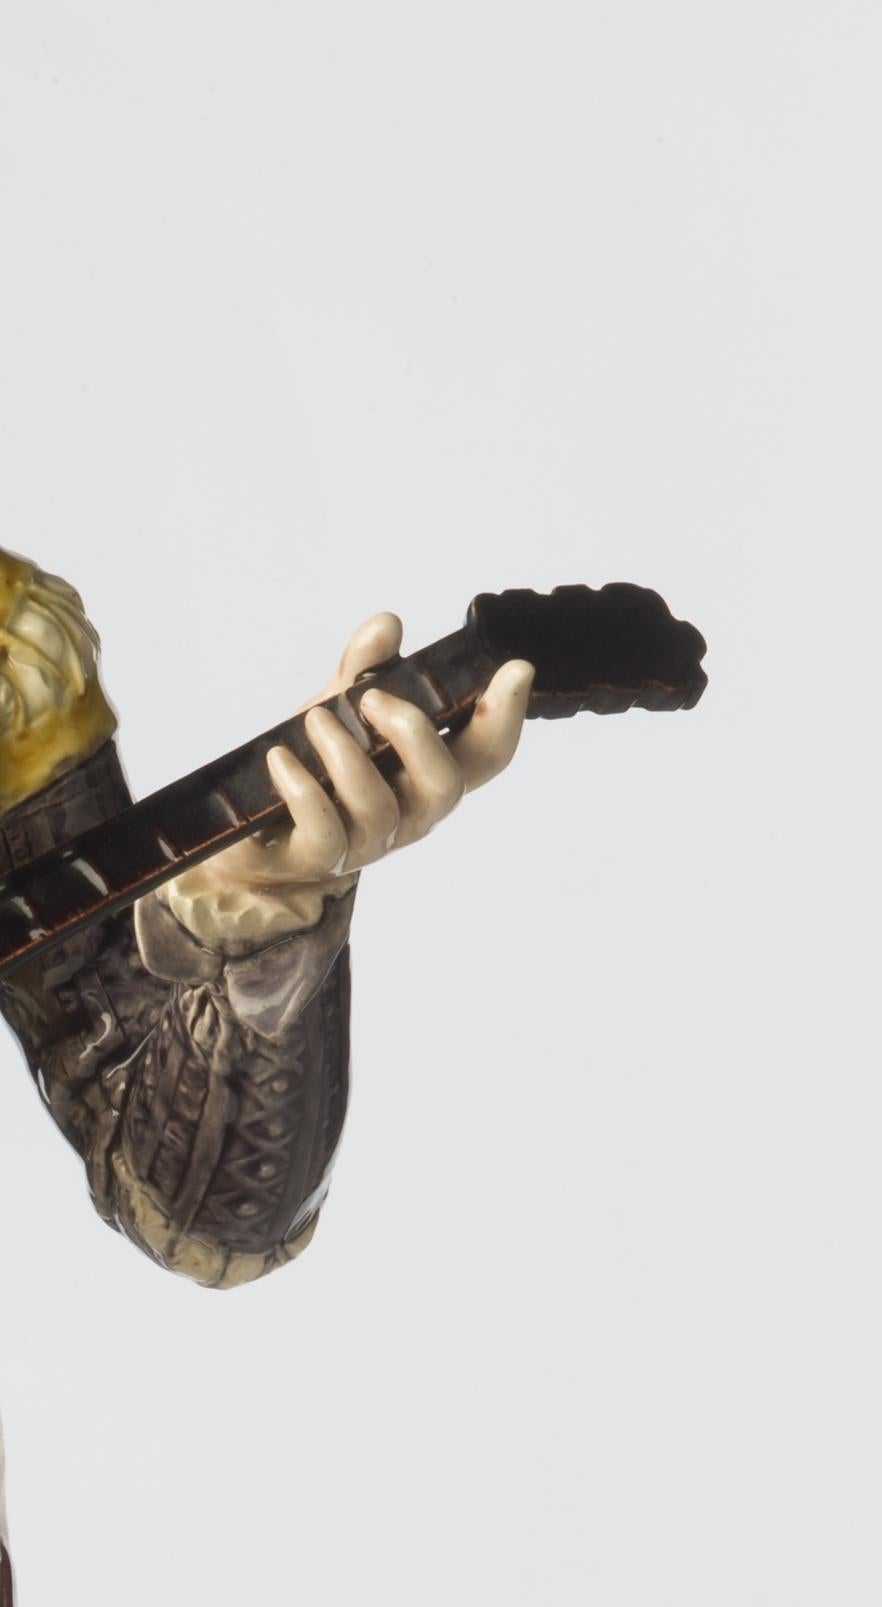 The last decades of the 19th century saw the relations between the Fine Arts, here sculpture, and the so-called industrial arts, earthenware production, flourish brilliantly. This Mandolin player is a perfect example. Created by the sculptor Adrien